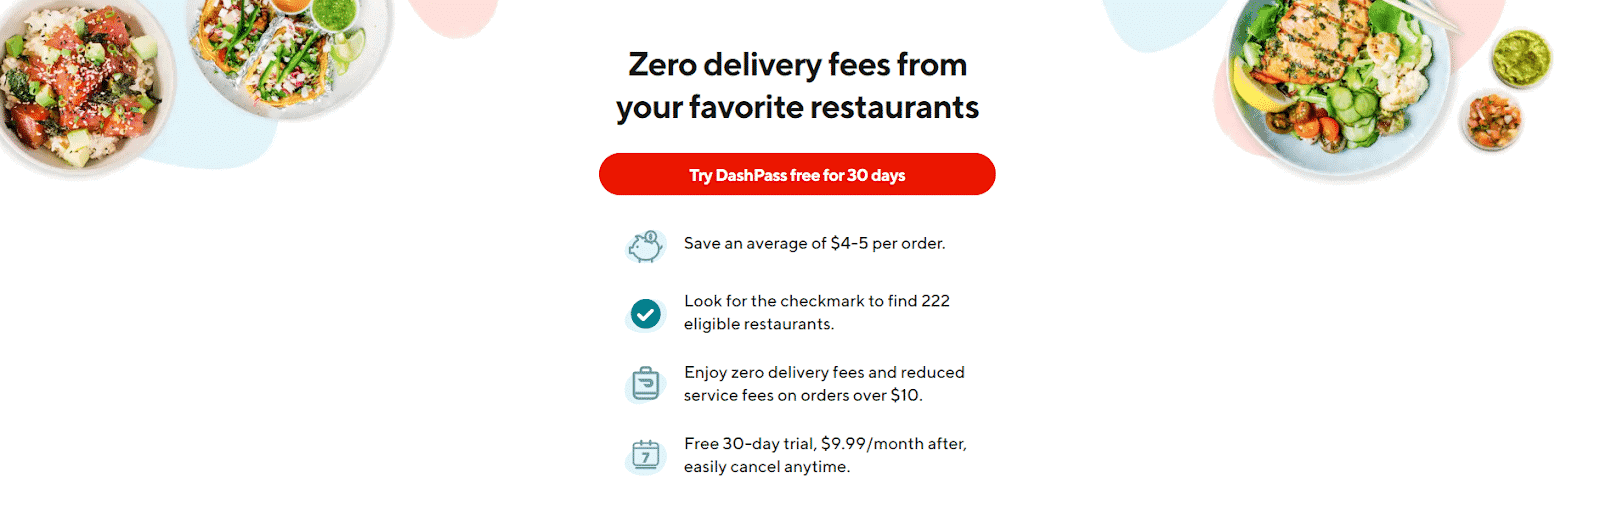 DoorDash fees: A zero delivery fees promise on the webpage for new user signups